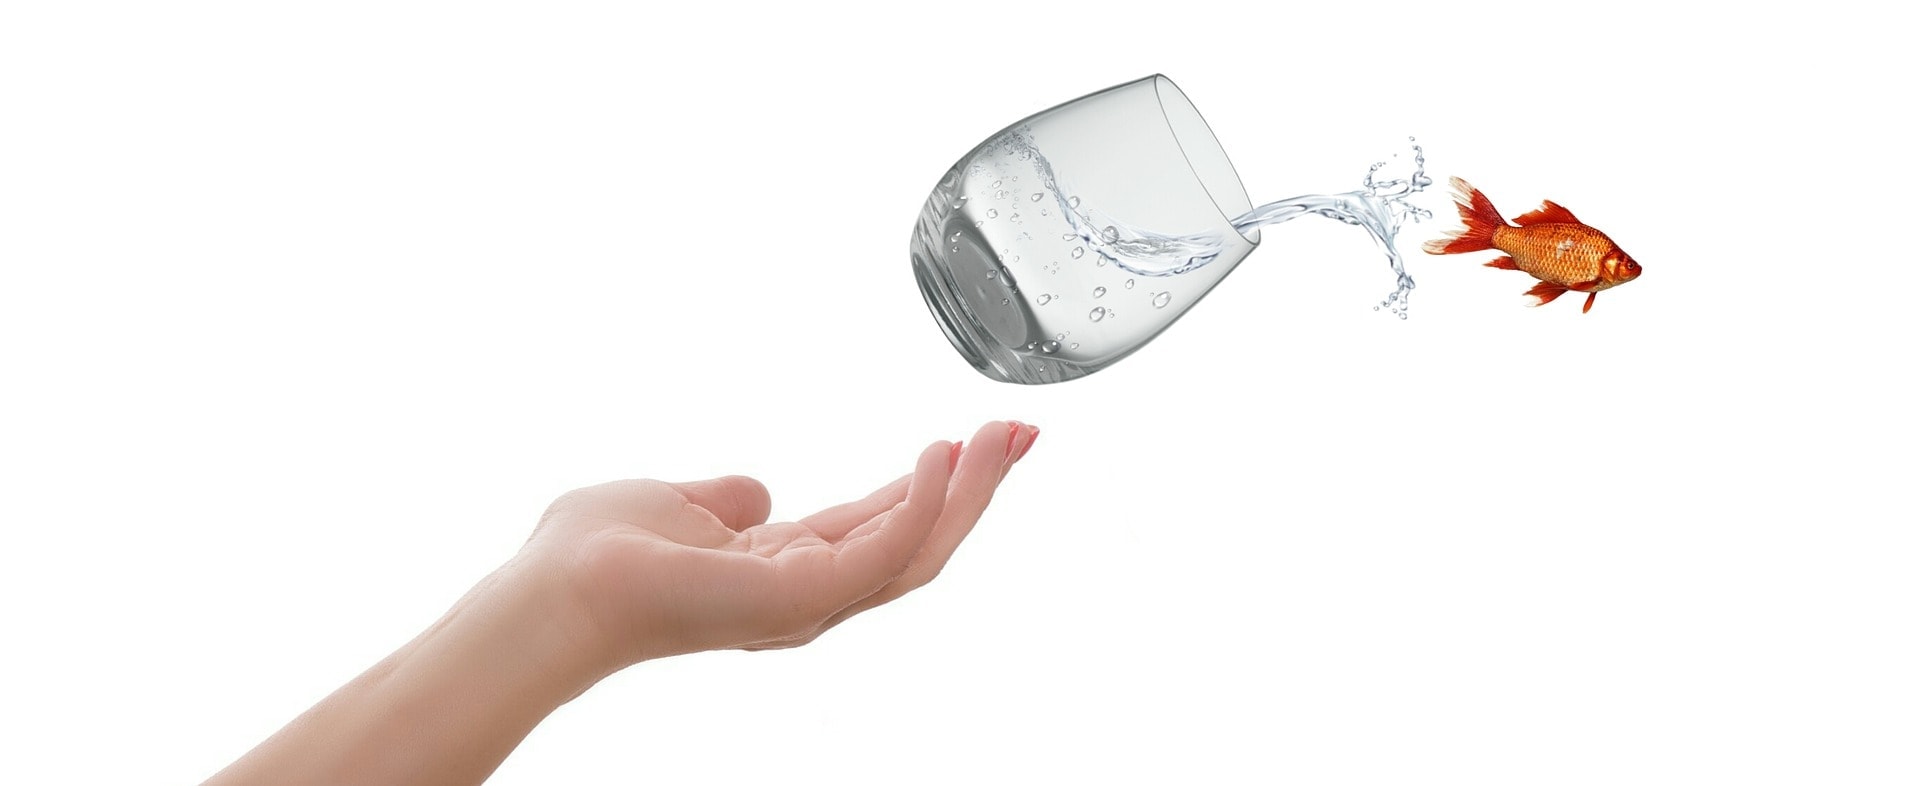 Photo of a glass of water leaving a hand and spilling; and a goldfish leaping out with the water